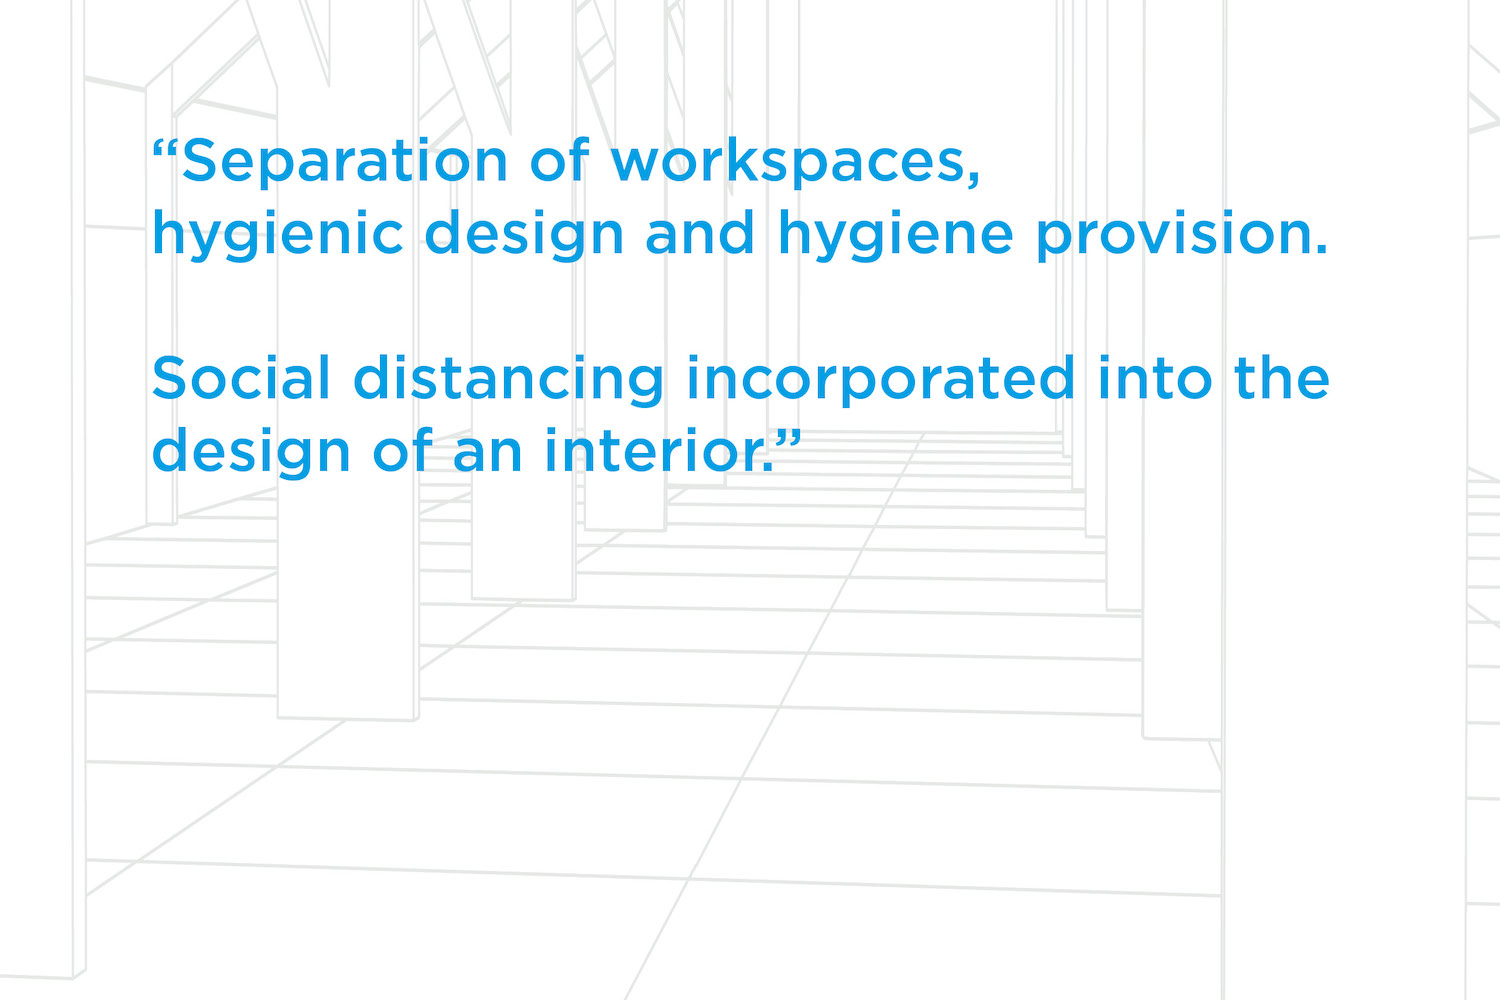 Survey Quote from Duraflor Research on Build-Environment and Flooring Industry post Covid-19